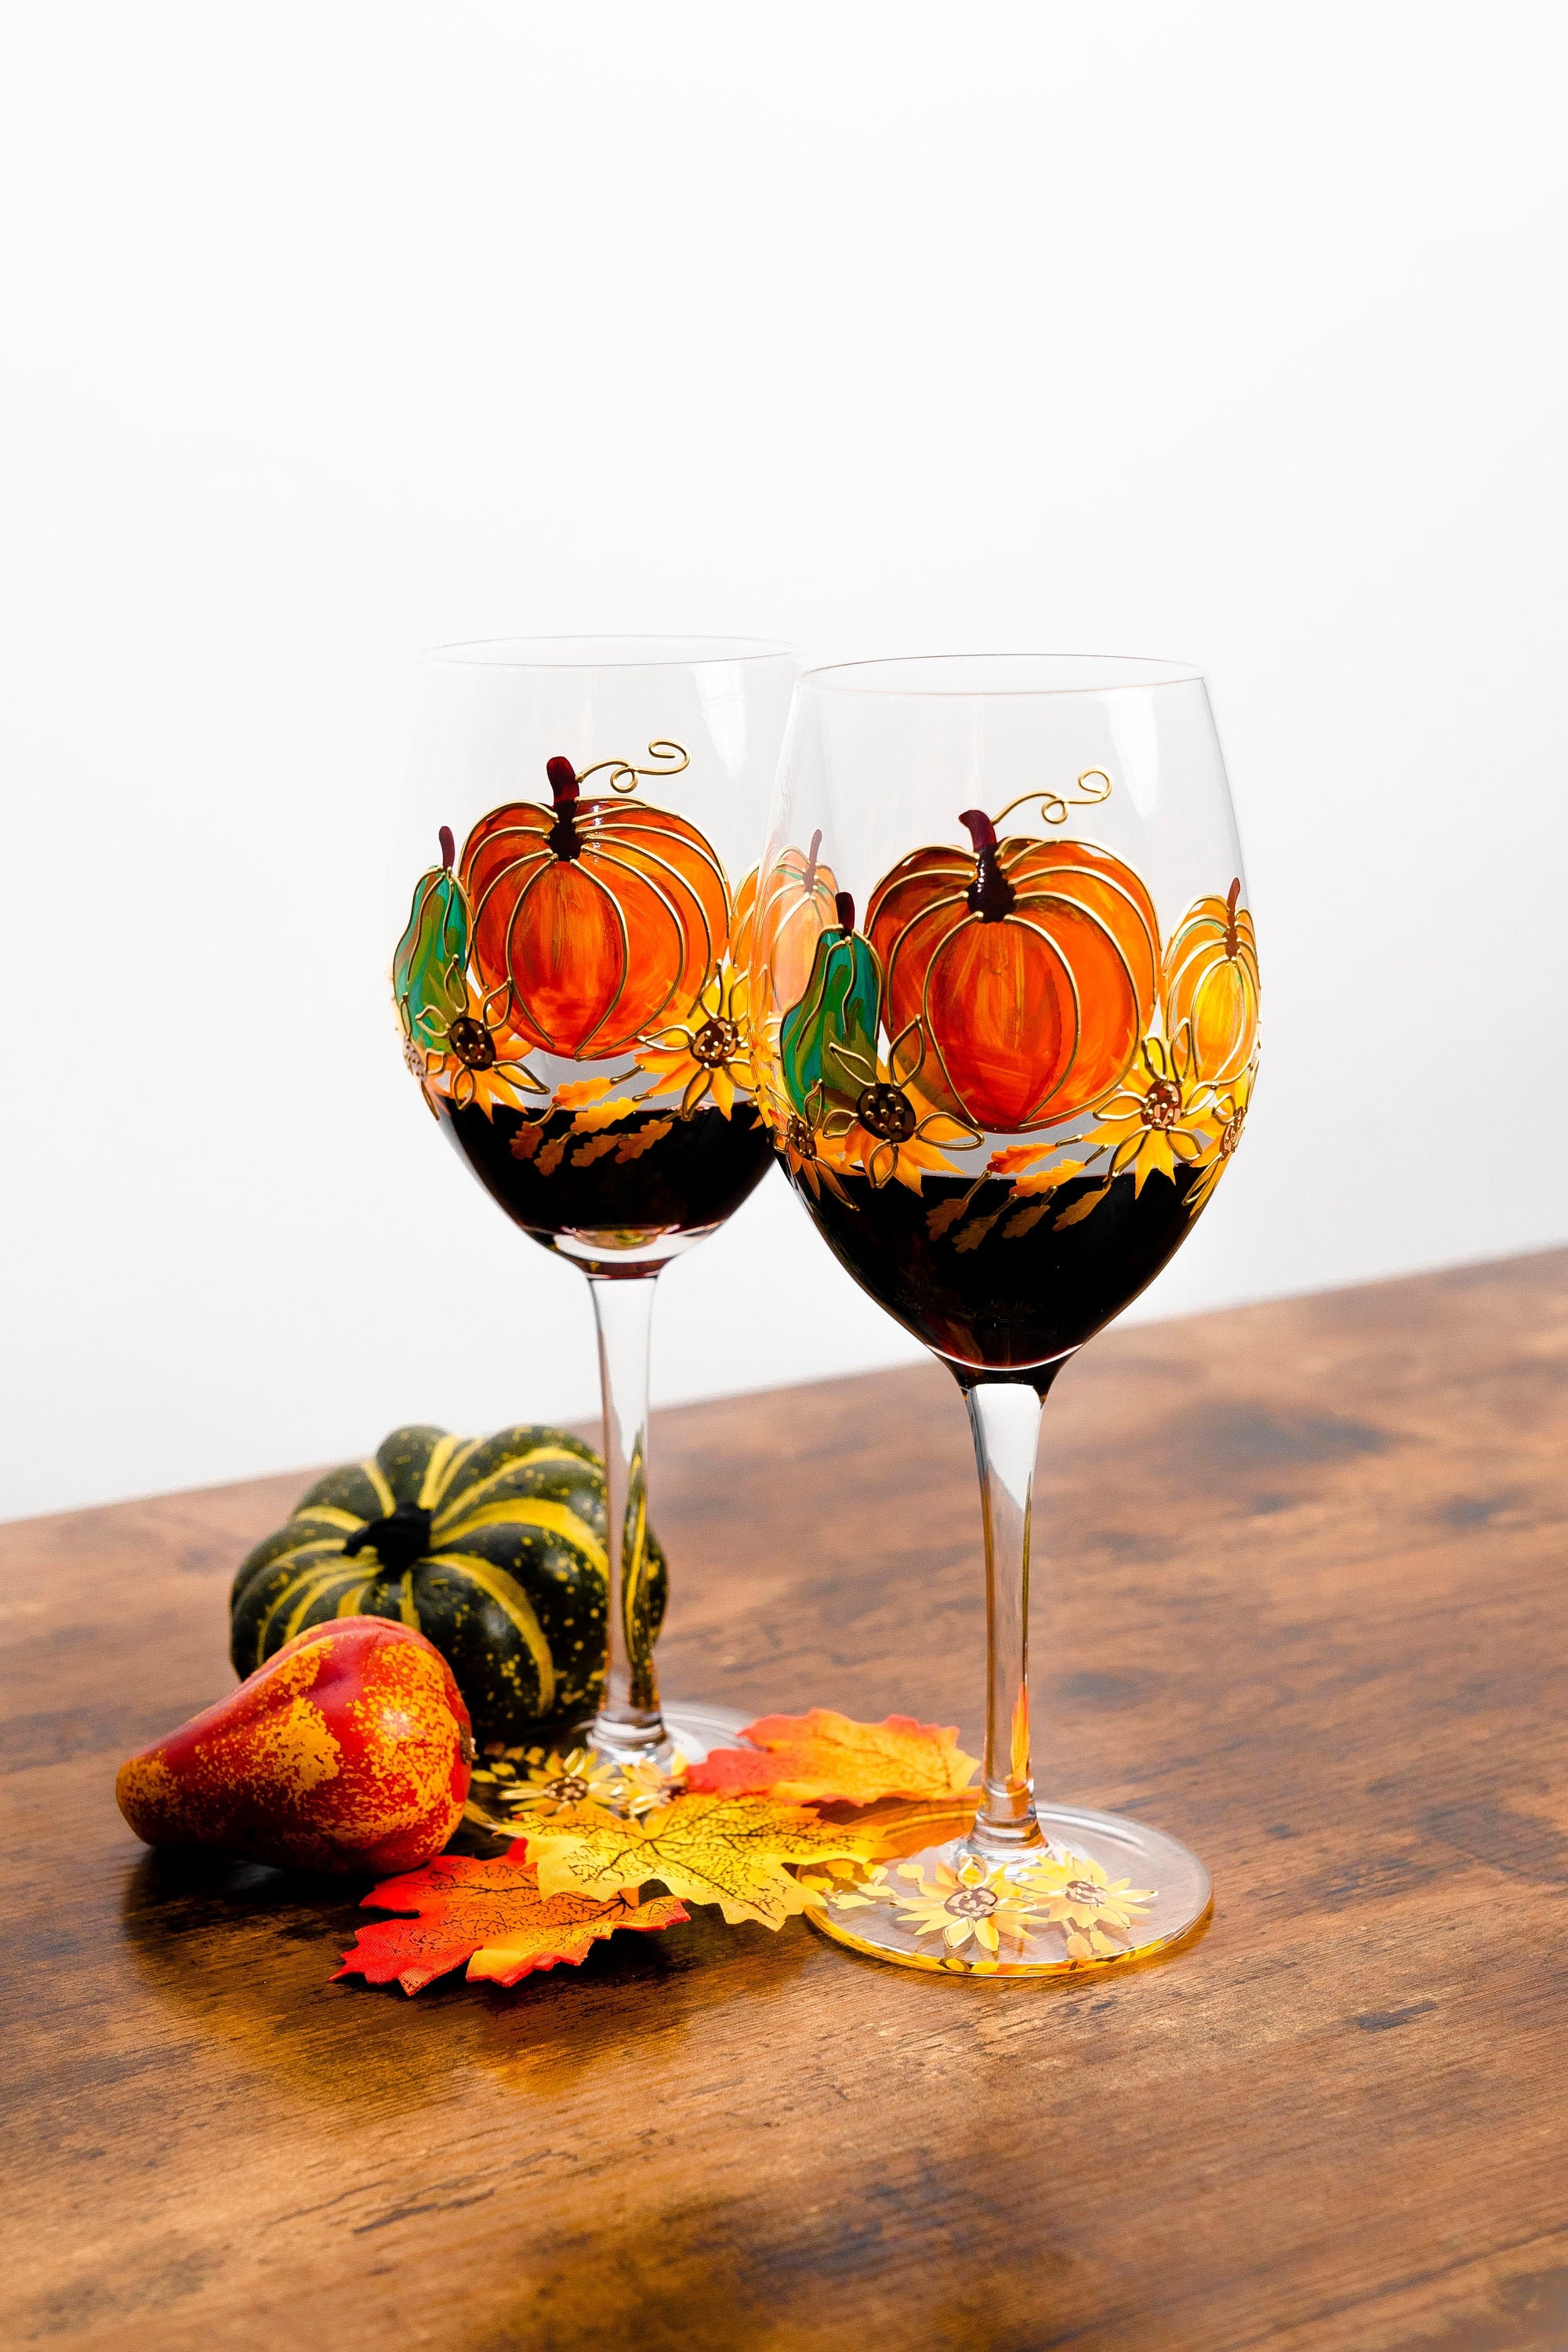 FALL GNOME WINE GLASS~HAND PAINTED! THANKSGIVING GNOME WINE GLASS